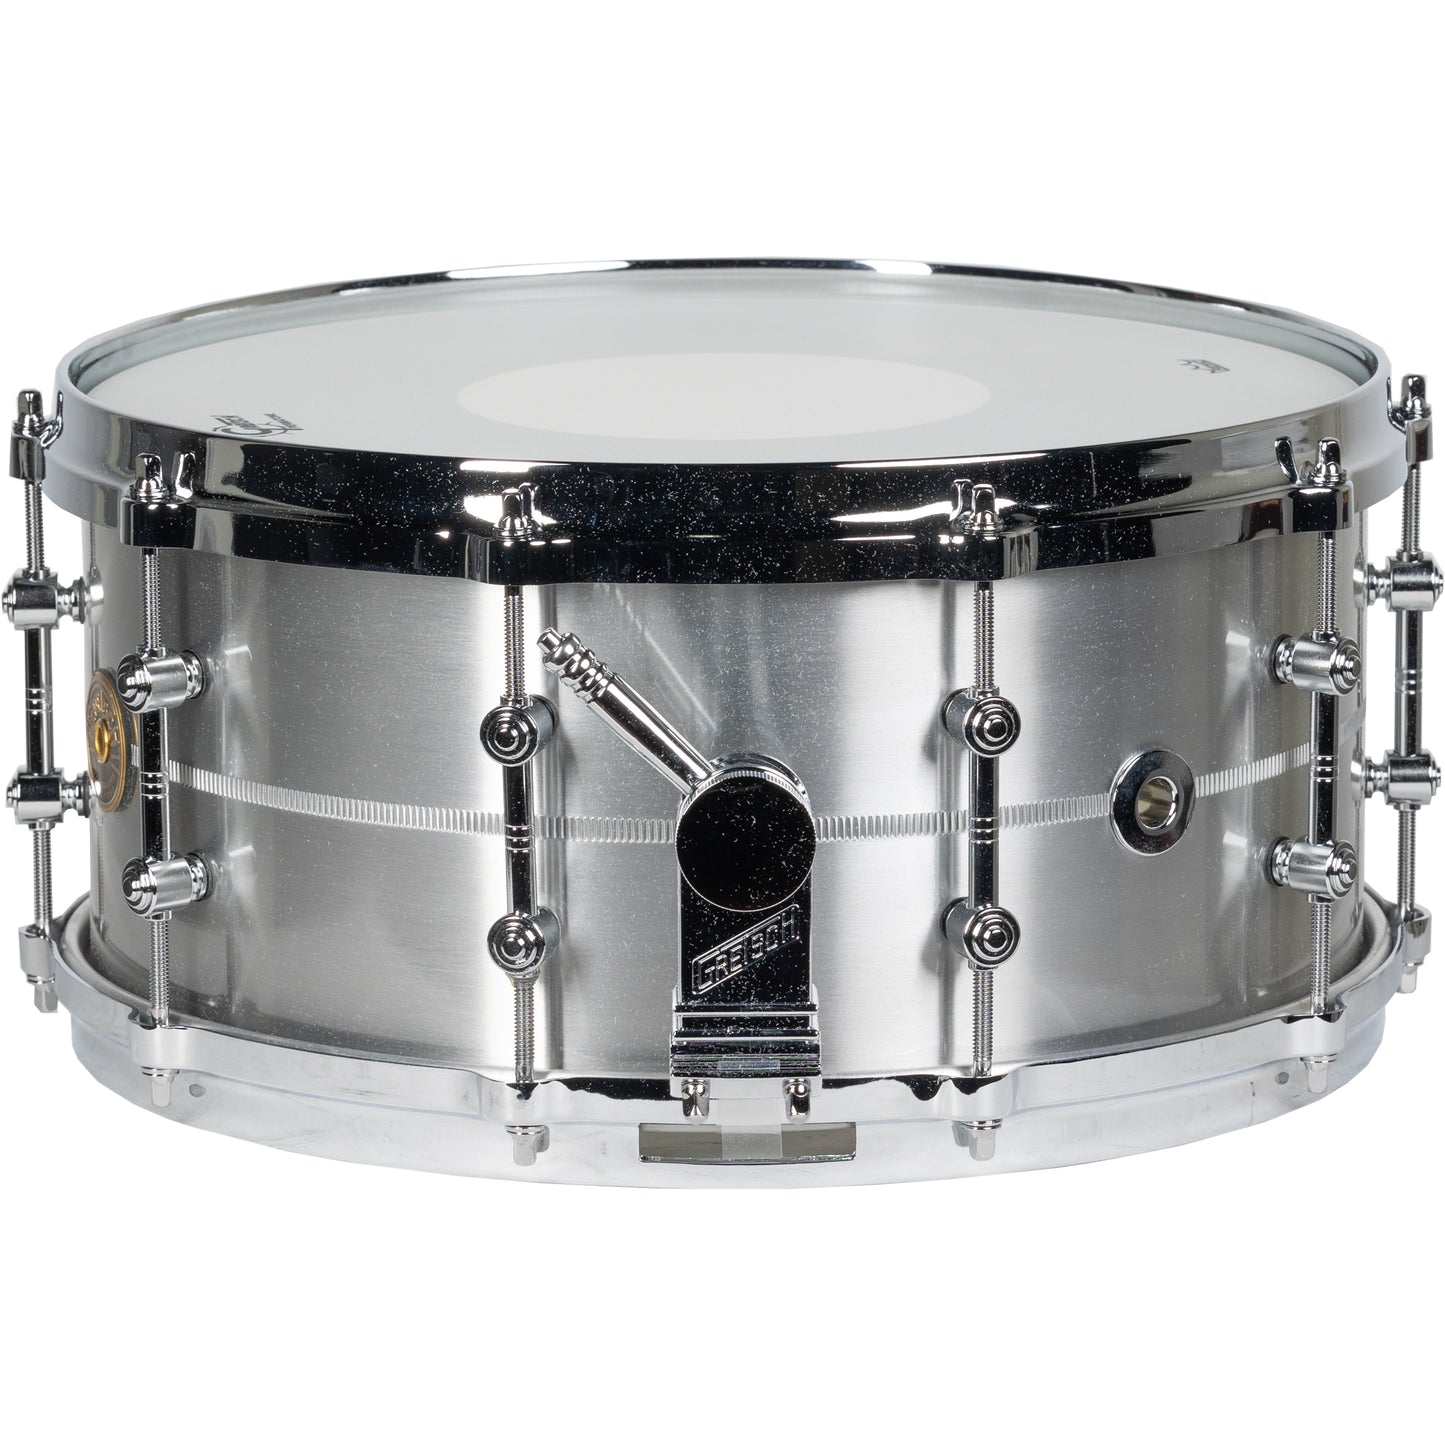 Gretsch Drums G-4164 Aluminum 6.5x14 Snare Drum w/ Tube Lugs